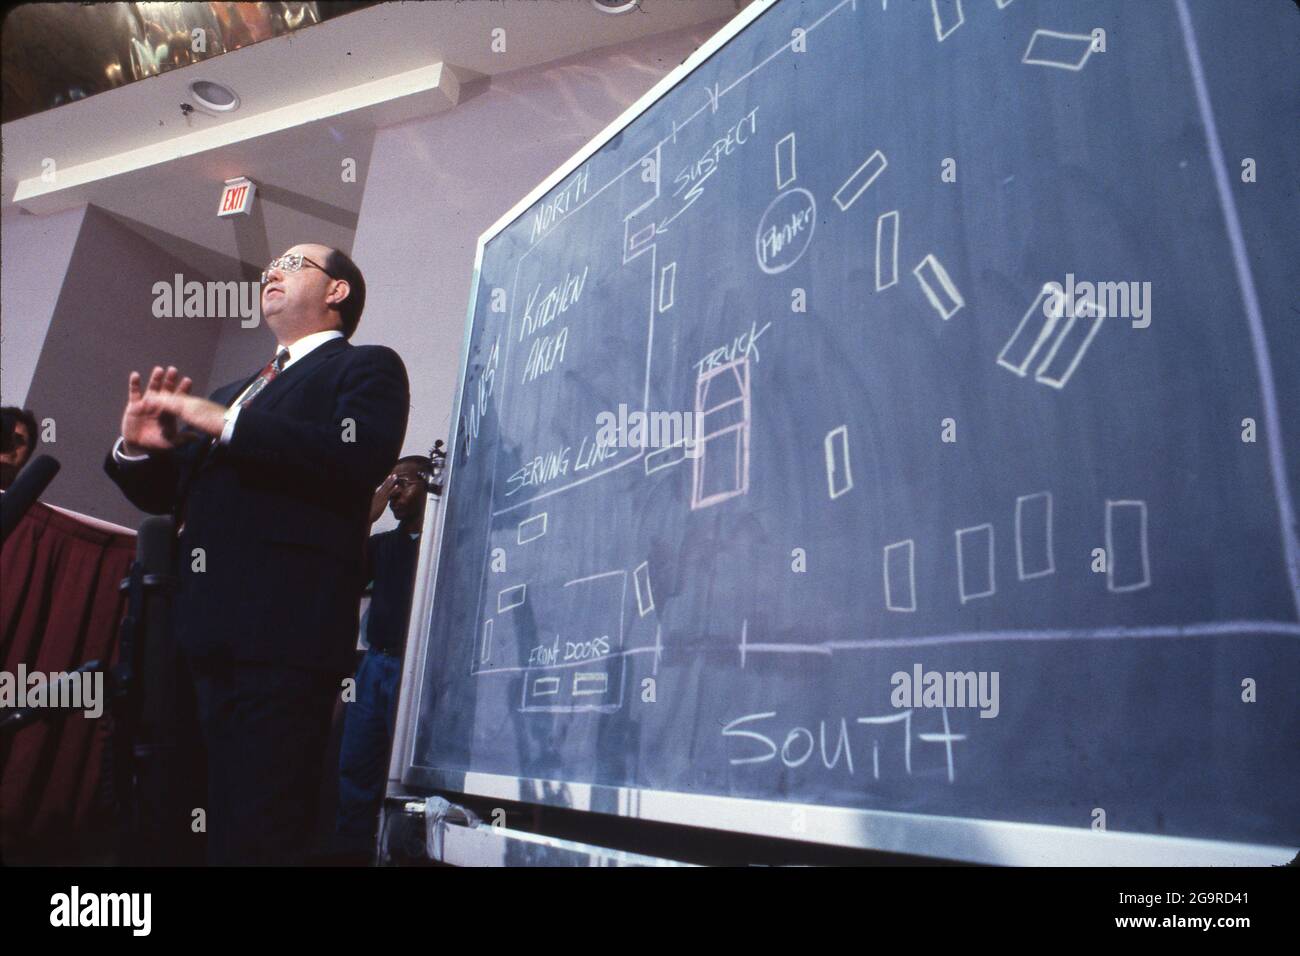 Killeen Texas USA, Oct. 16, 1991: Police spokesman conducts press briefing in the aftermath of a mass shooting at Luby's Cafeteria in Killeen, Texas on October 16, 1991 where 35-year old George Hennard crashed a pickup into the eatery and shot 23 people to death before killing himself. The chalkboard shows the positions of murder victims inside the restaurant. ©Bob Daemmrich Stock Photo